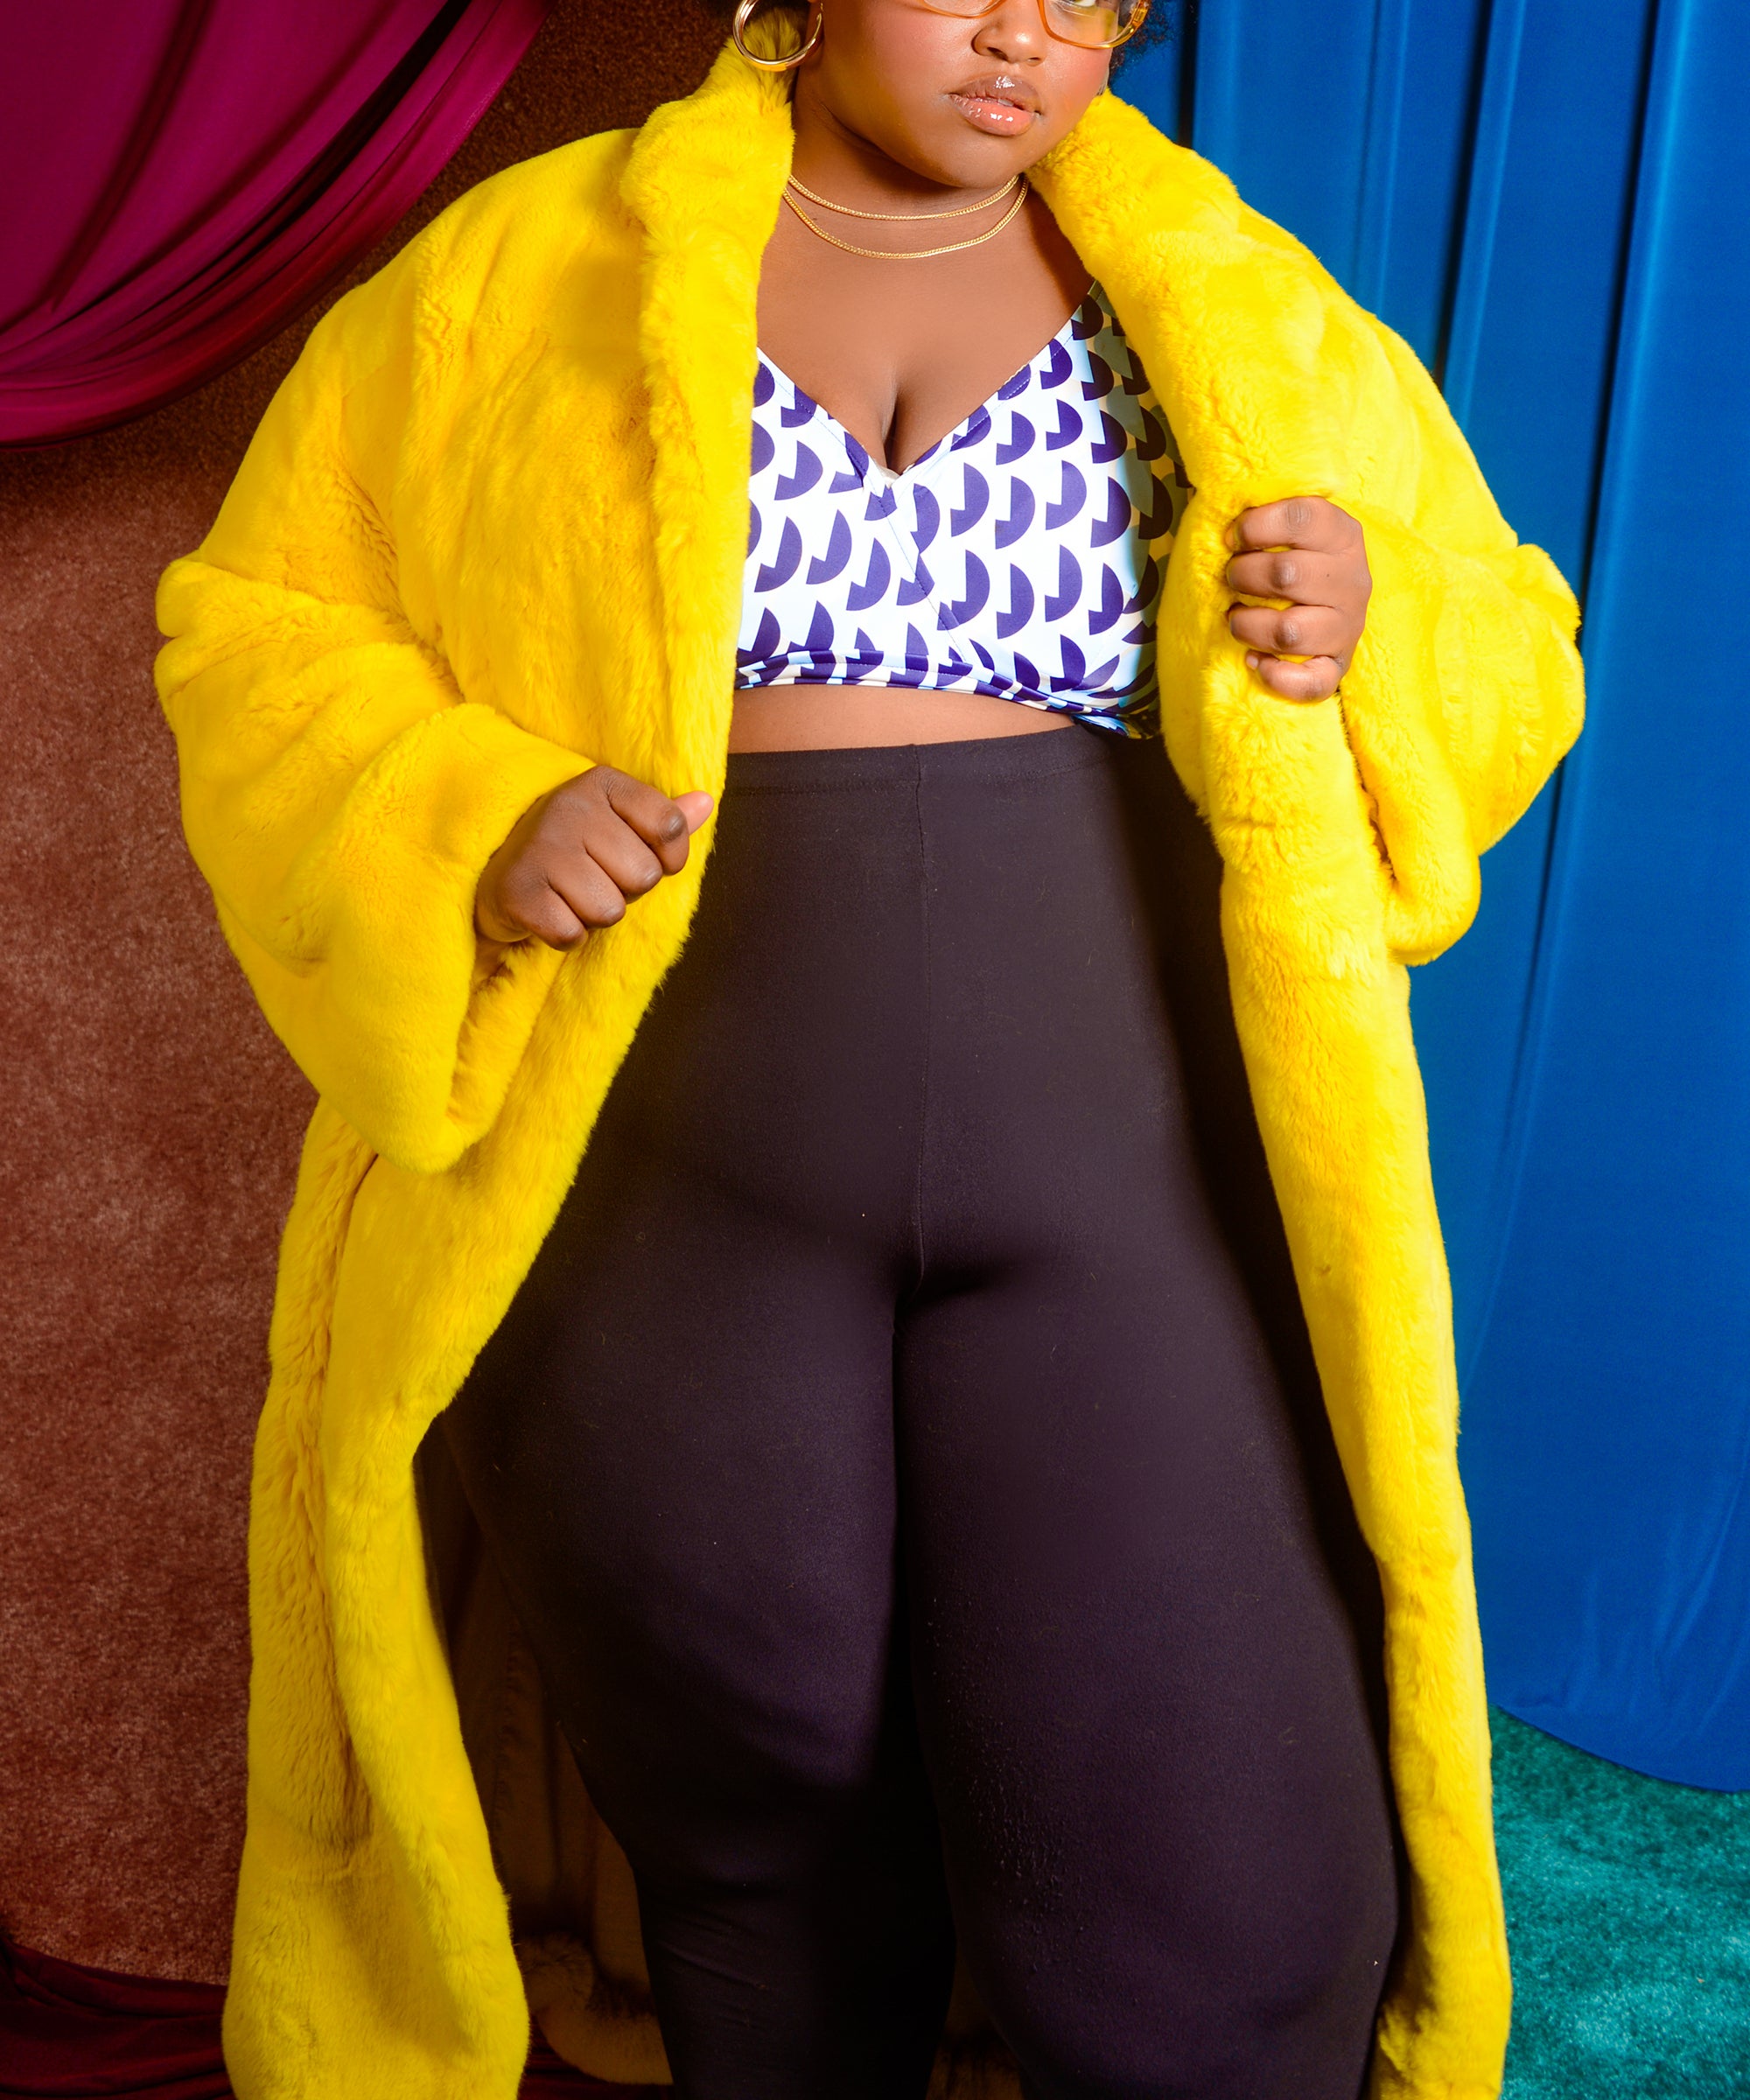 Plus Size Fashion - Torrid love the dress and that jacket.